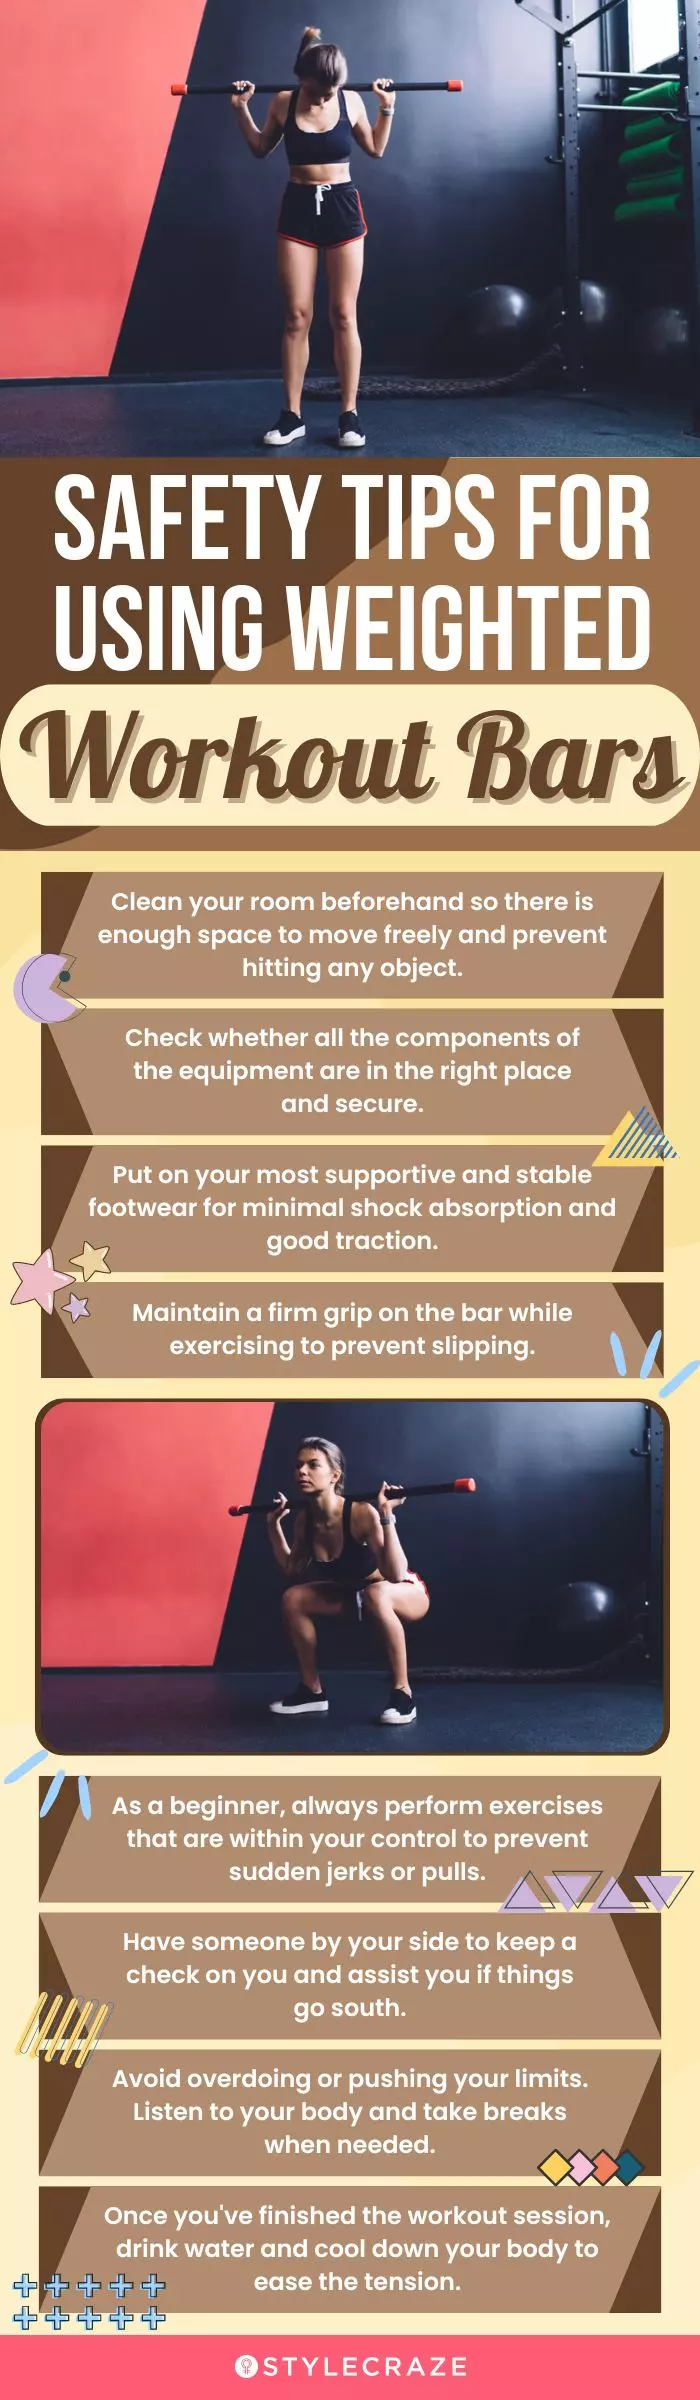 Safety Tips For Using Weighted Workout Bars (infographic)